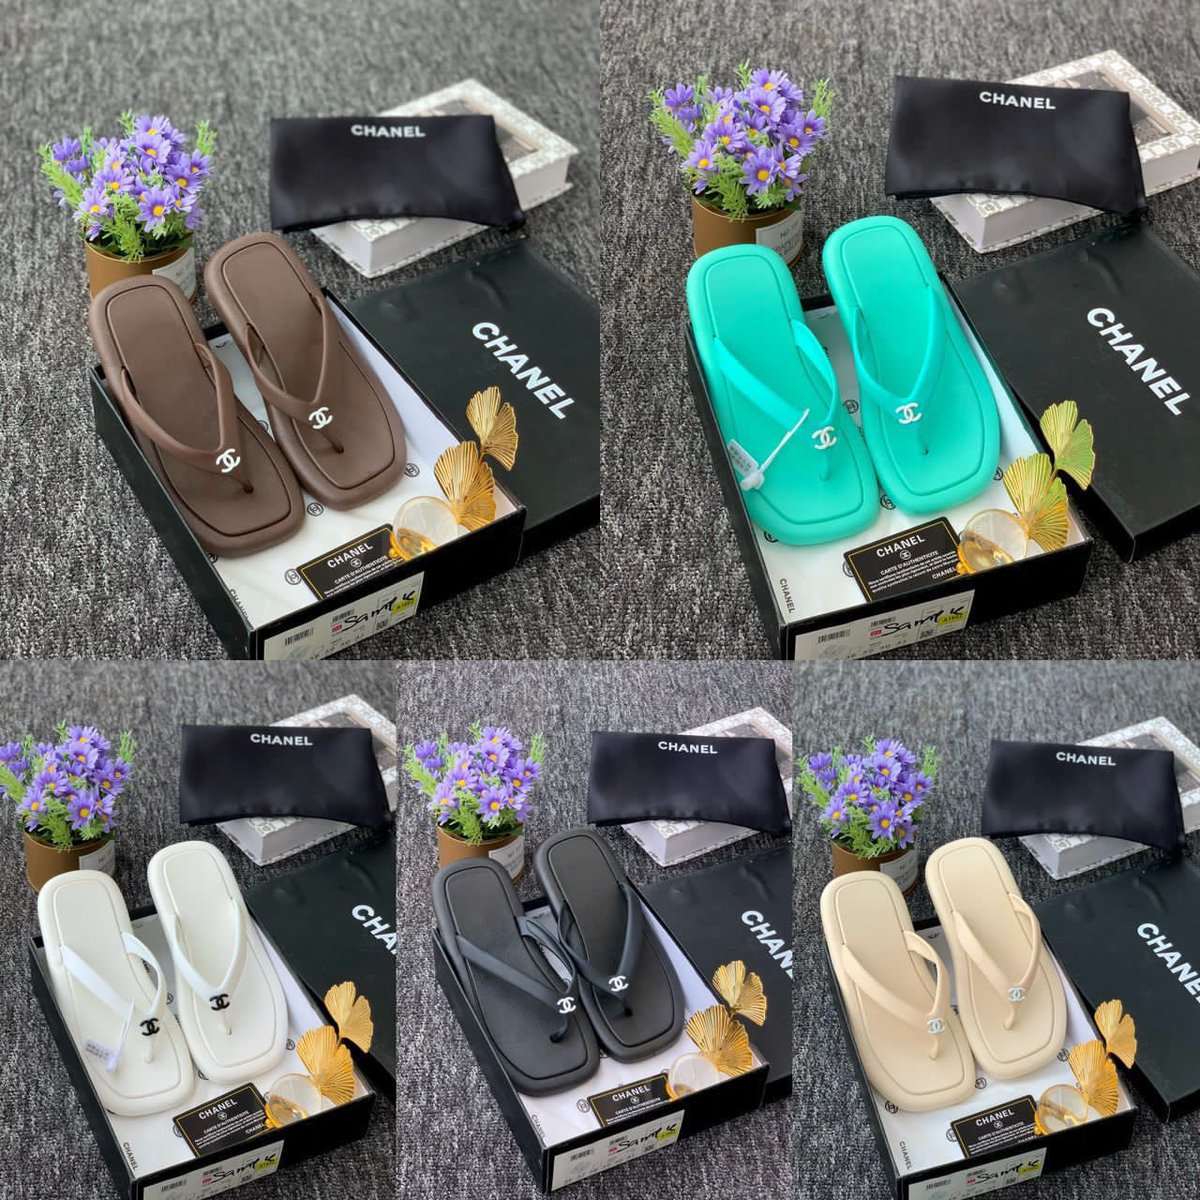 Chanel Luxury Easywear Slide💃🏻🥰.  (rubber, step out in style)

💥Nude. Green. Brown and 36/37, 38/39, 40/41*

💥White. Black. 40/41 only

💥Price:15,500

Comes with full package 📦 & accessories 
Please help me rtw🙏🙏